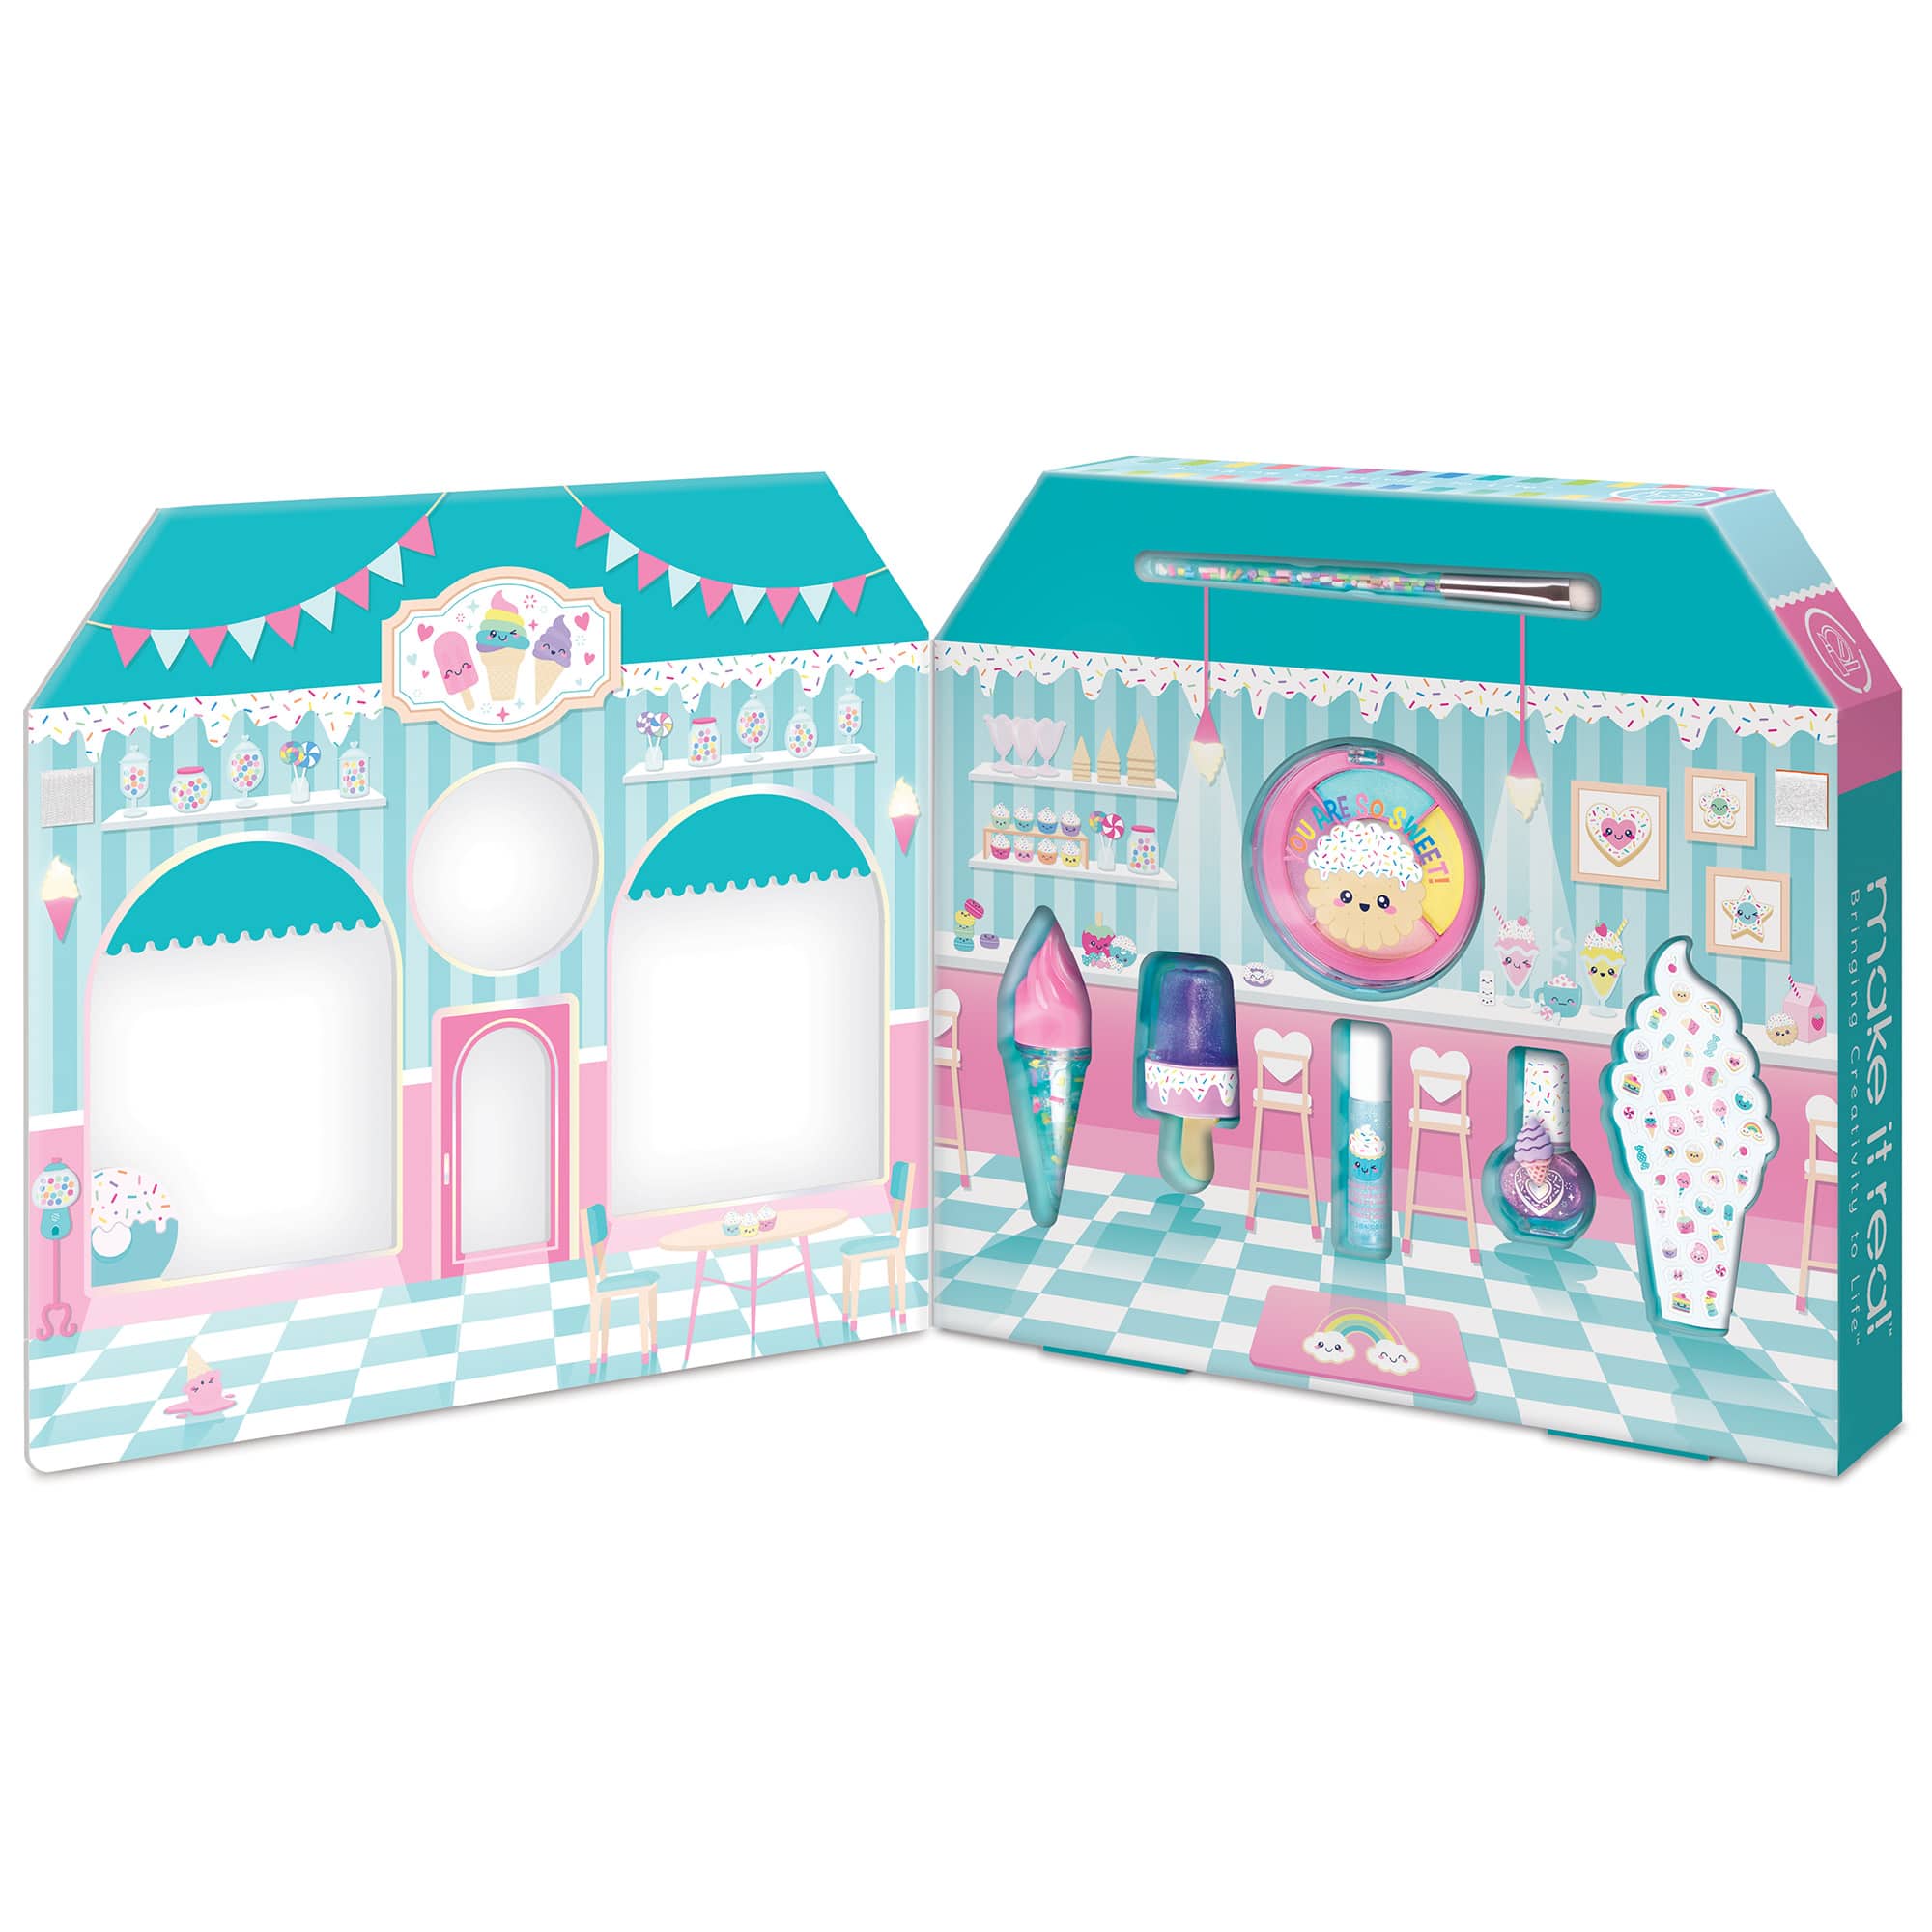 Make It Real&#x2122; Candy Shop Cosmetic Set